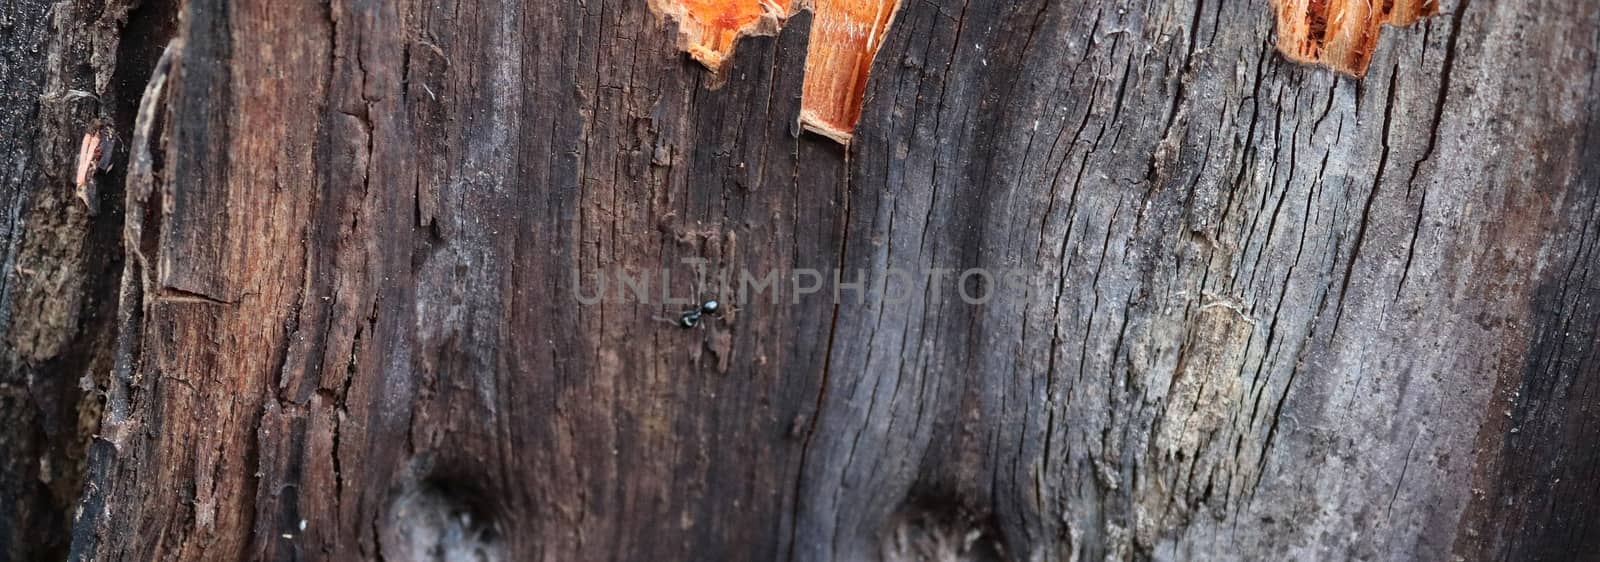 Detailed close up view on different wood surfaces showing planks logs and wooden walls in high resolution